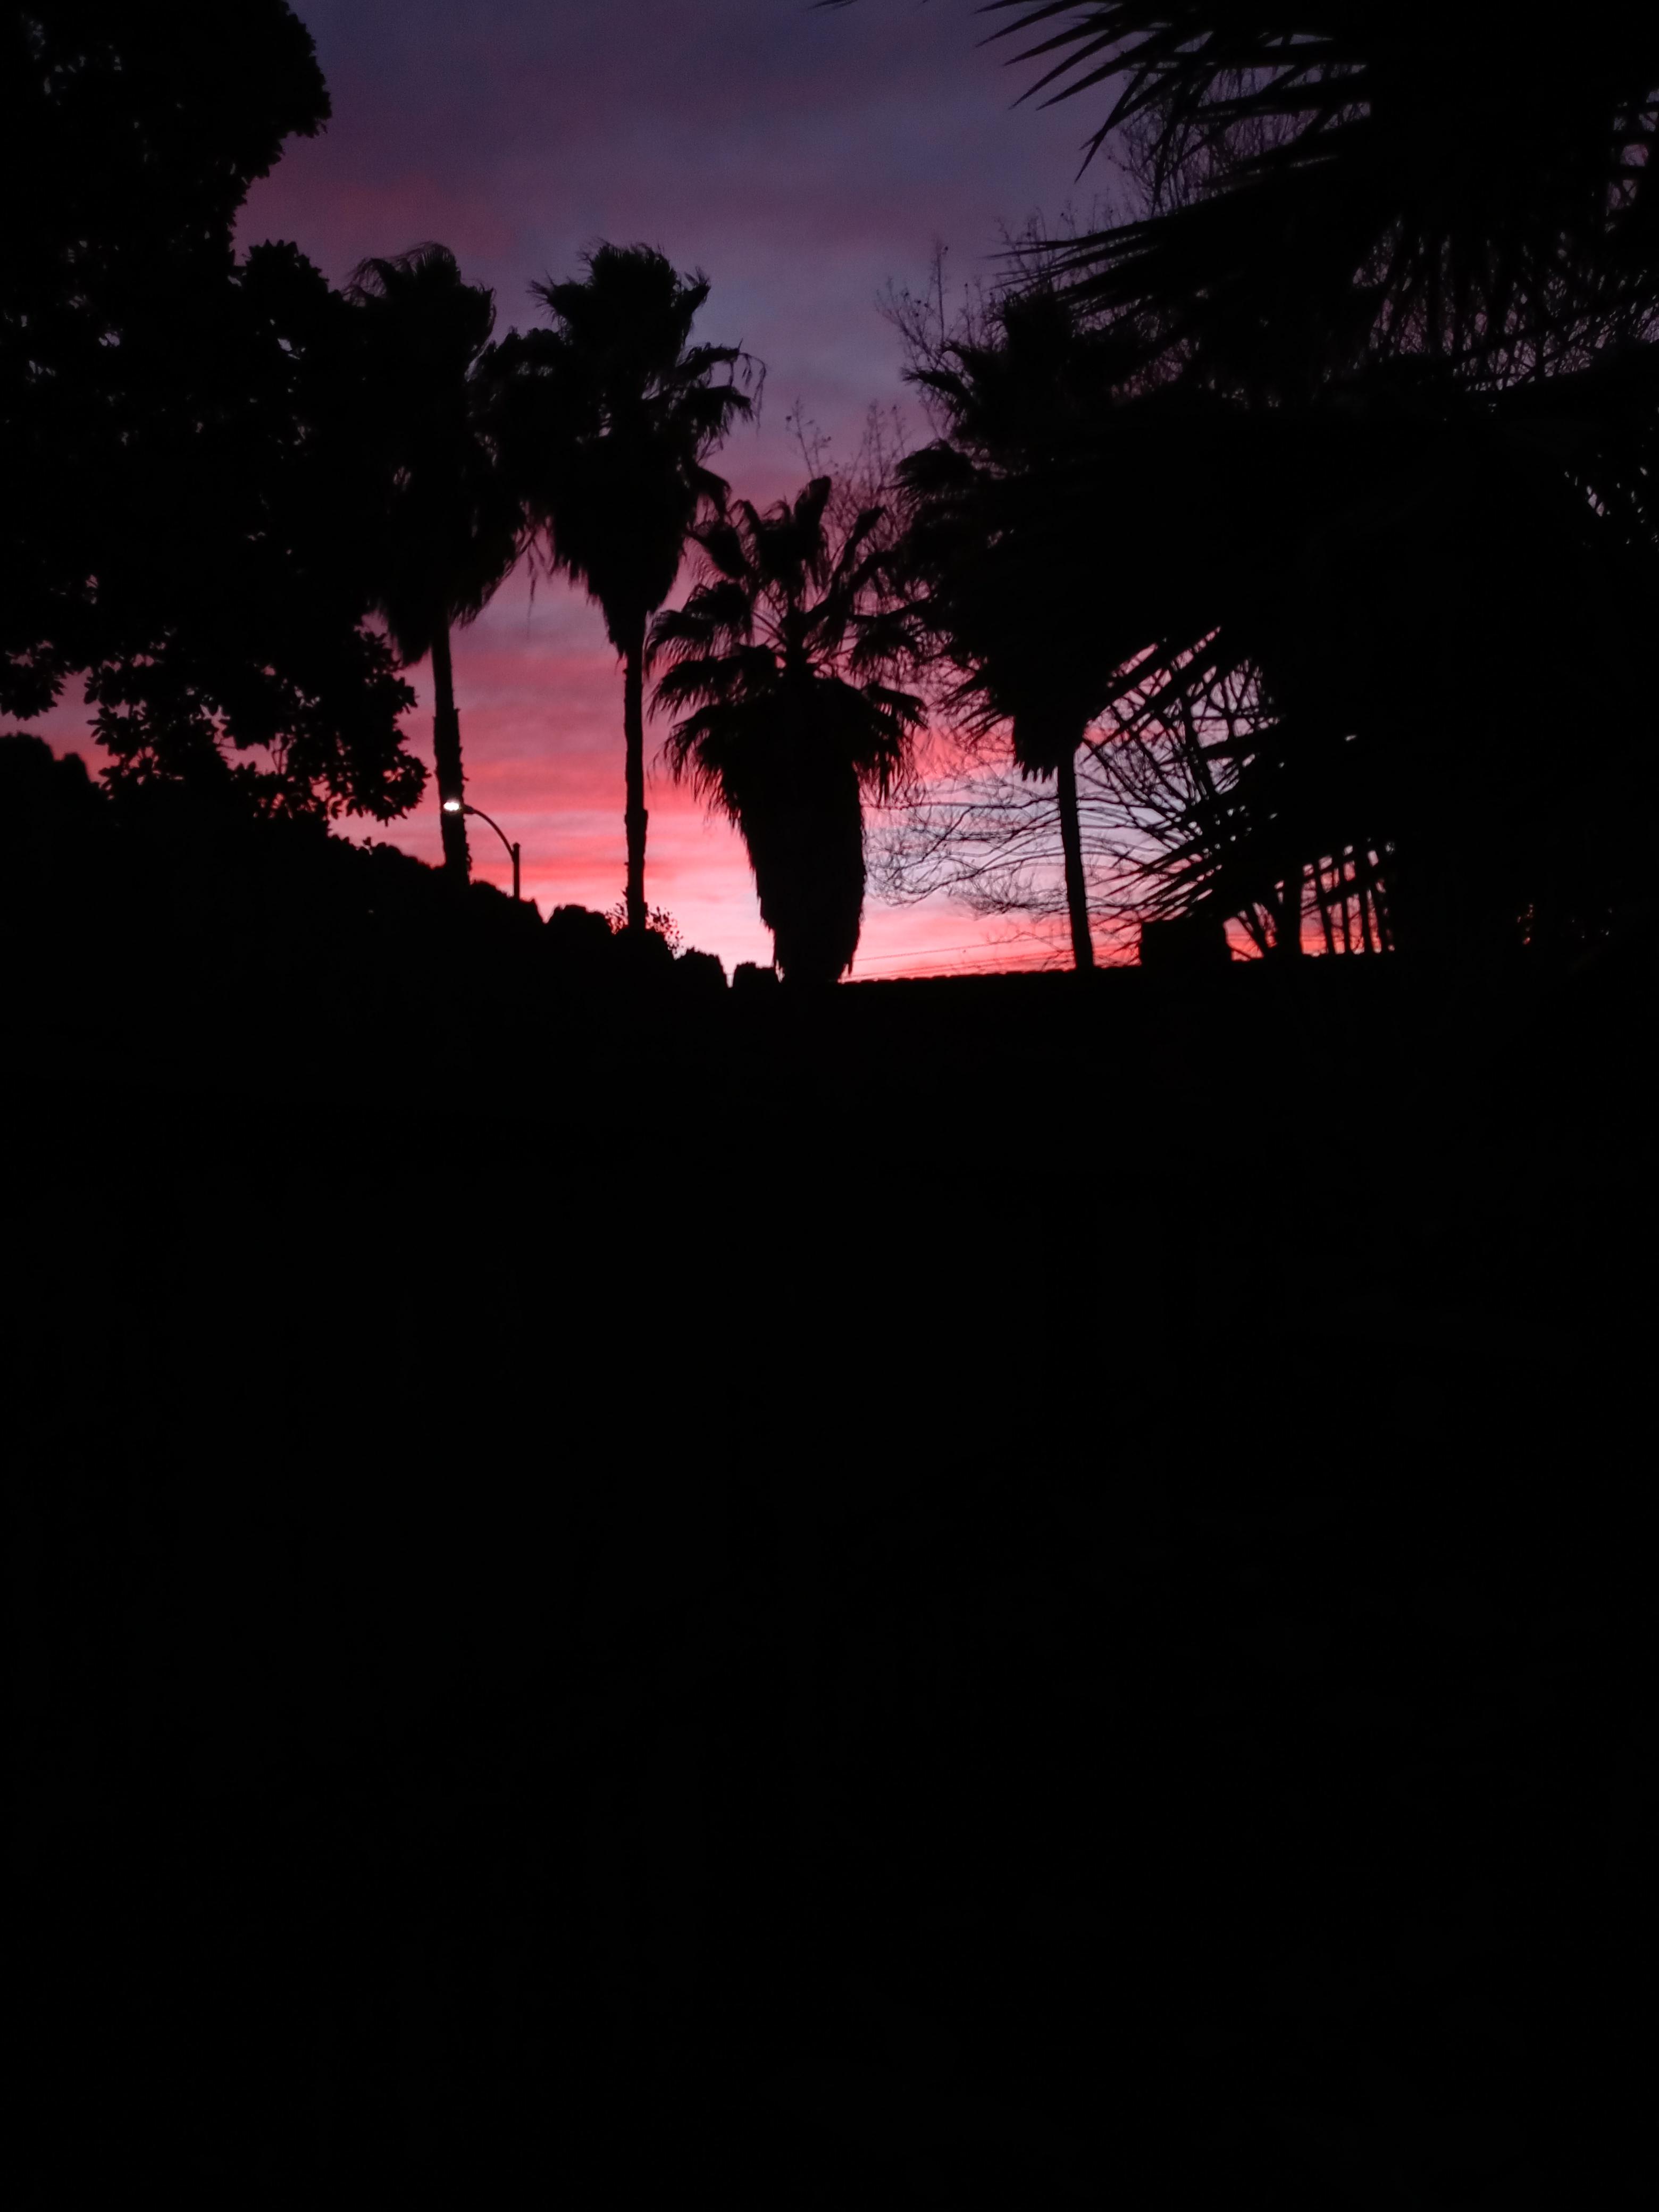 A silhouette of palm trees with a pink and purple sunset in the background. - Texas